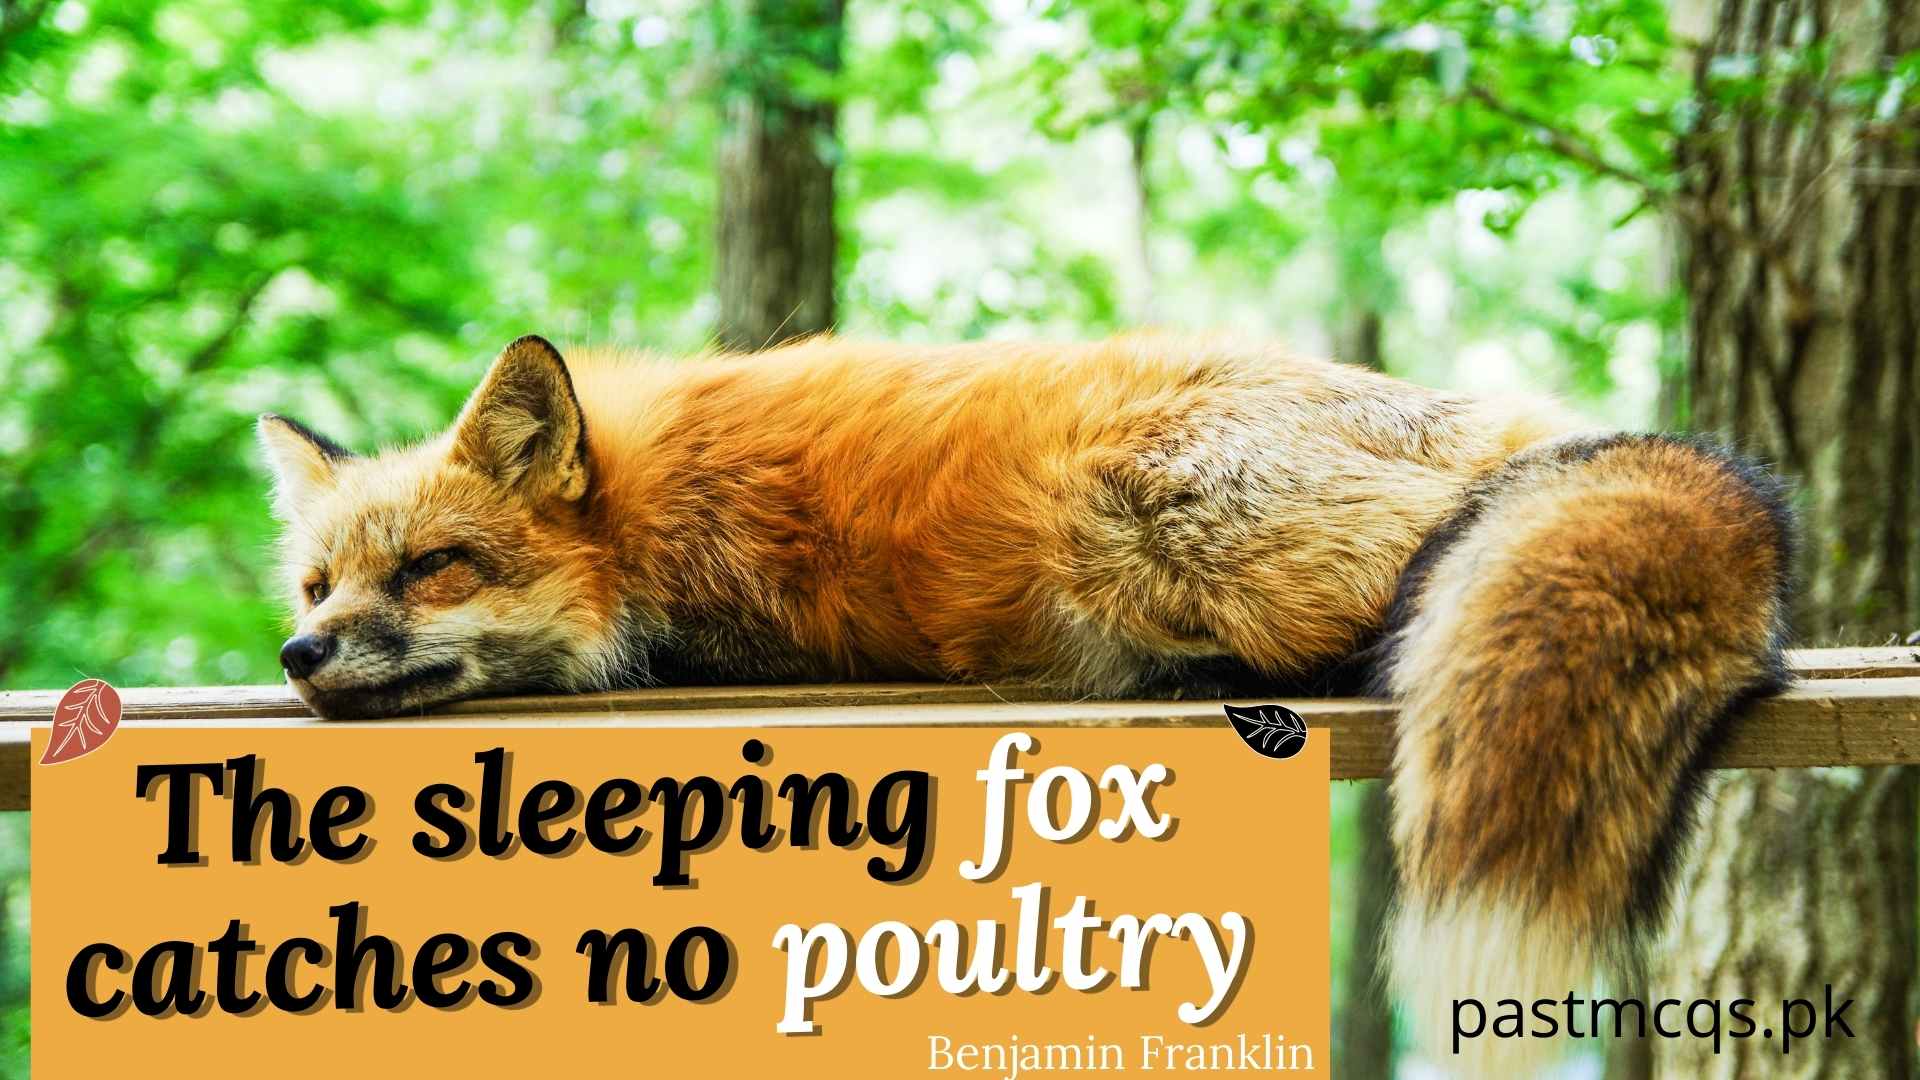 The sleeping fox catches no poultry